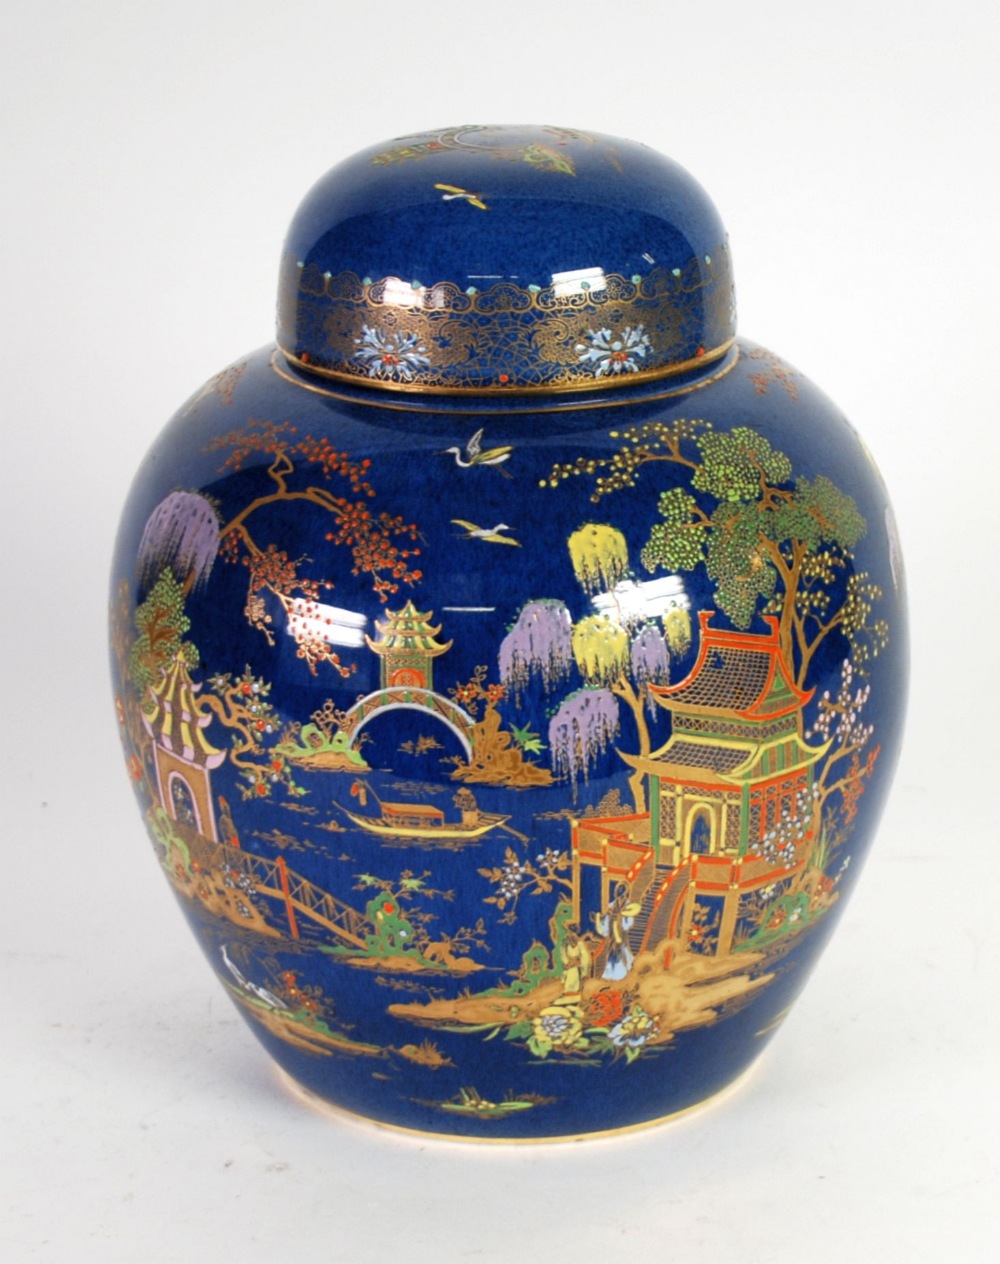 A 1930'S WILTSHAW & ROBINSON CARLTON ware ovoid ginger jar with domed cover, Chinoiserie decorated